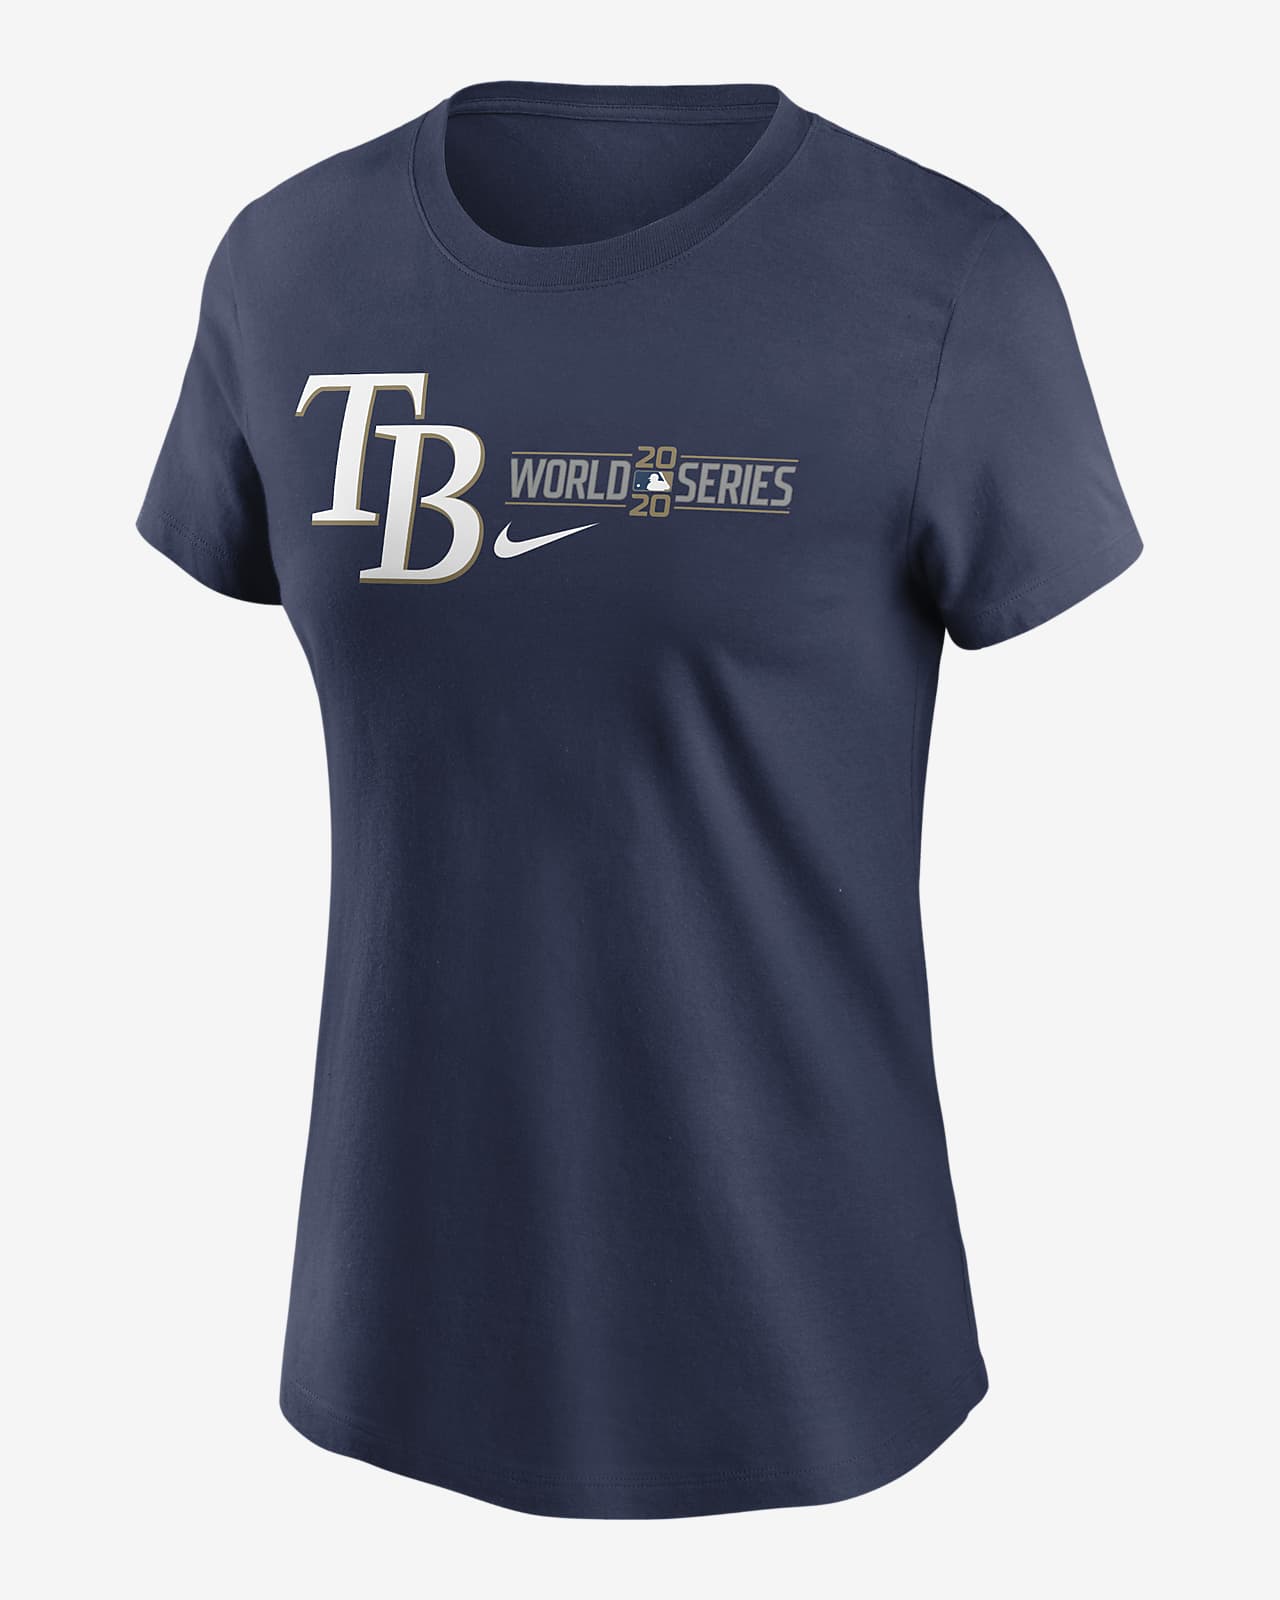 tampa bay rays jersey 2020